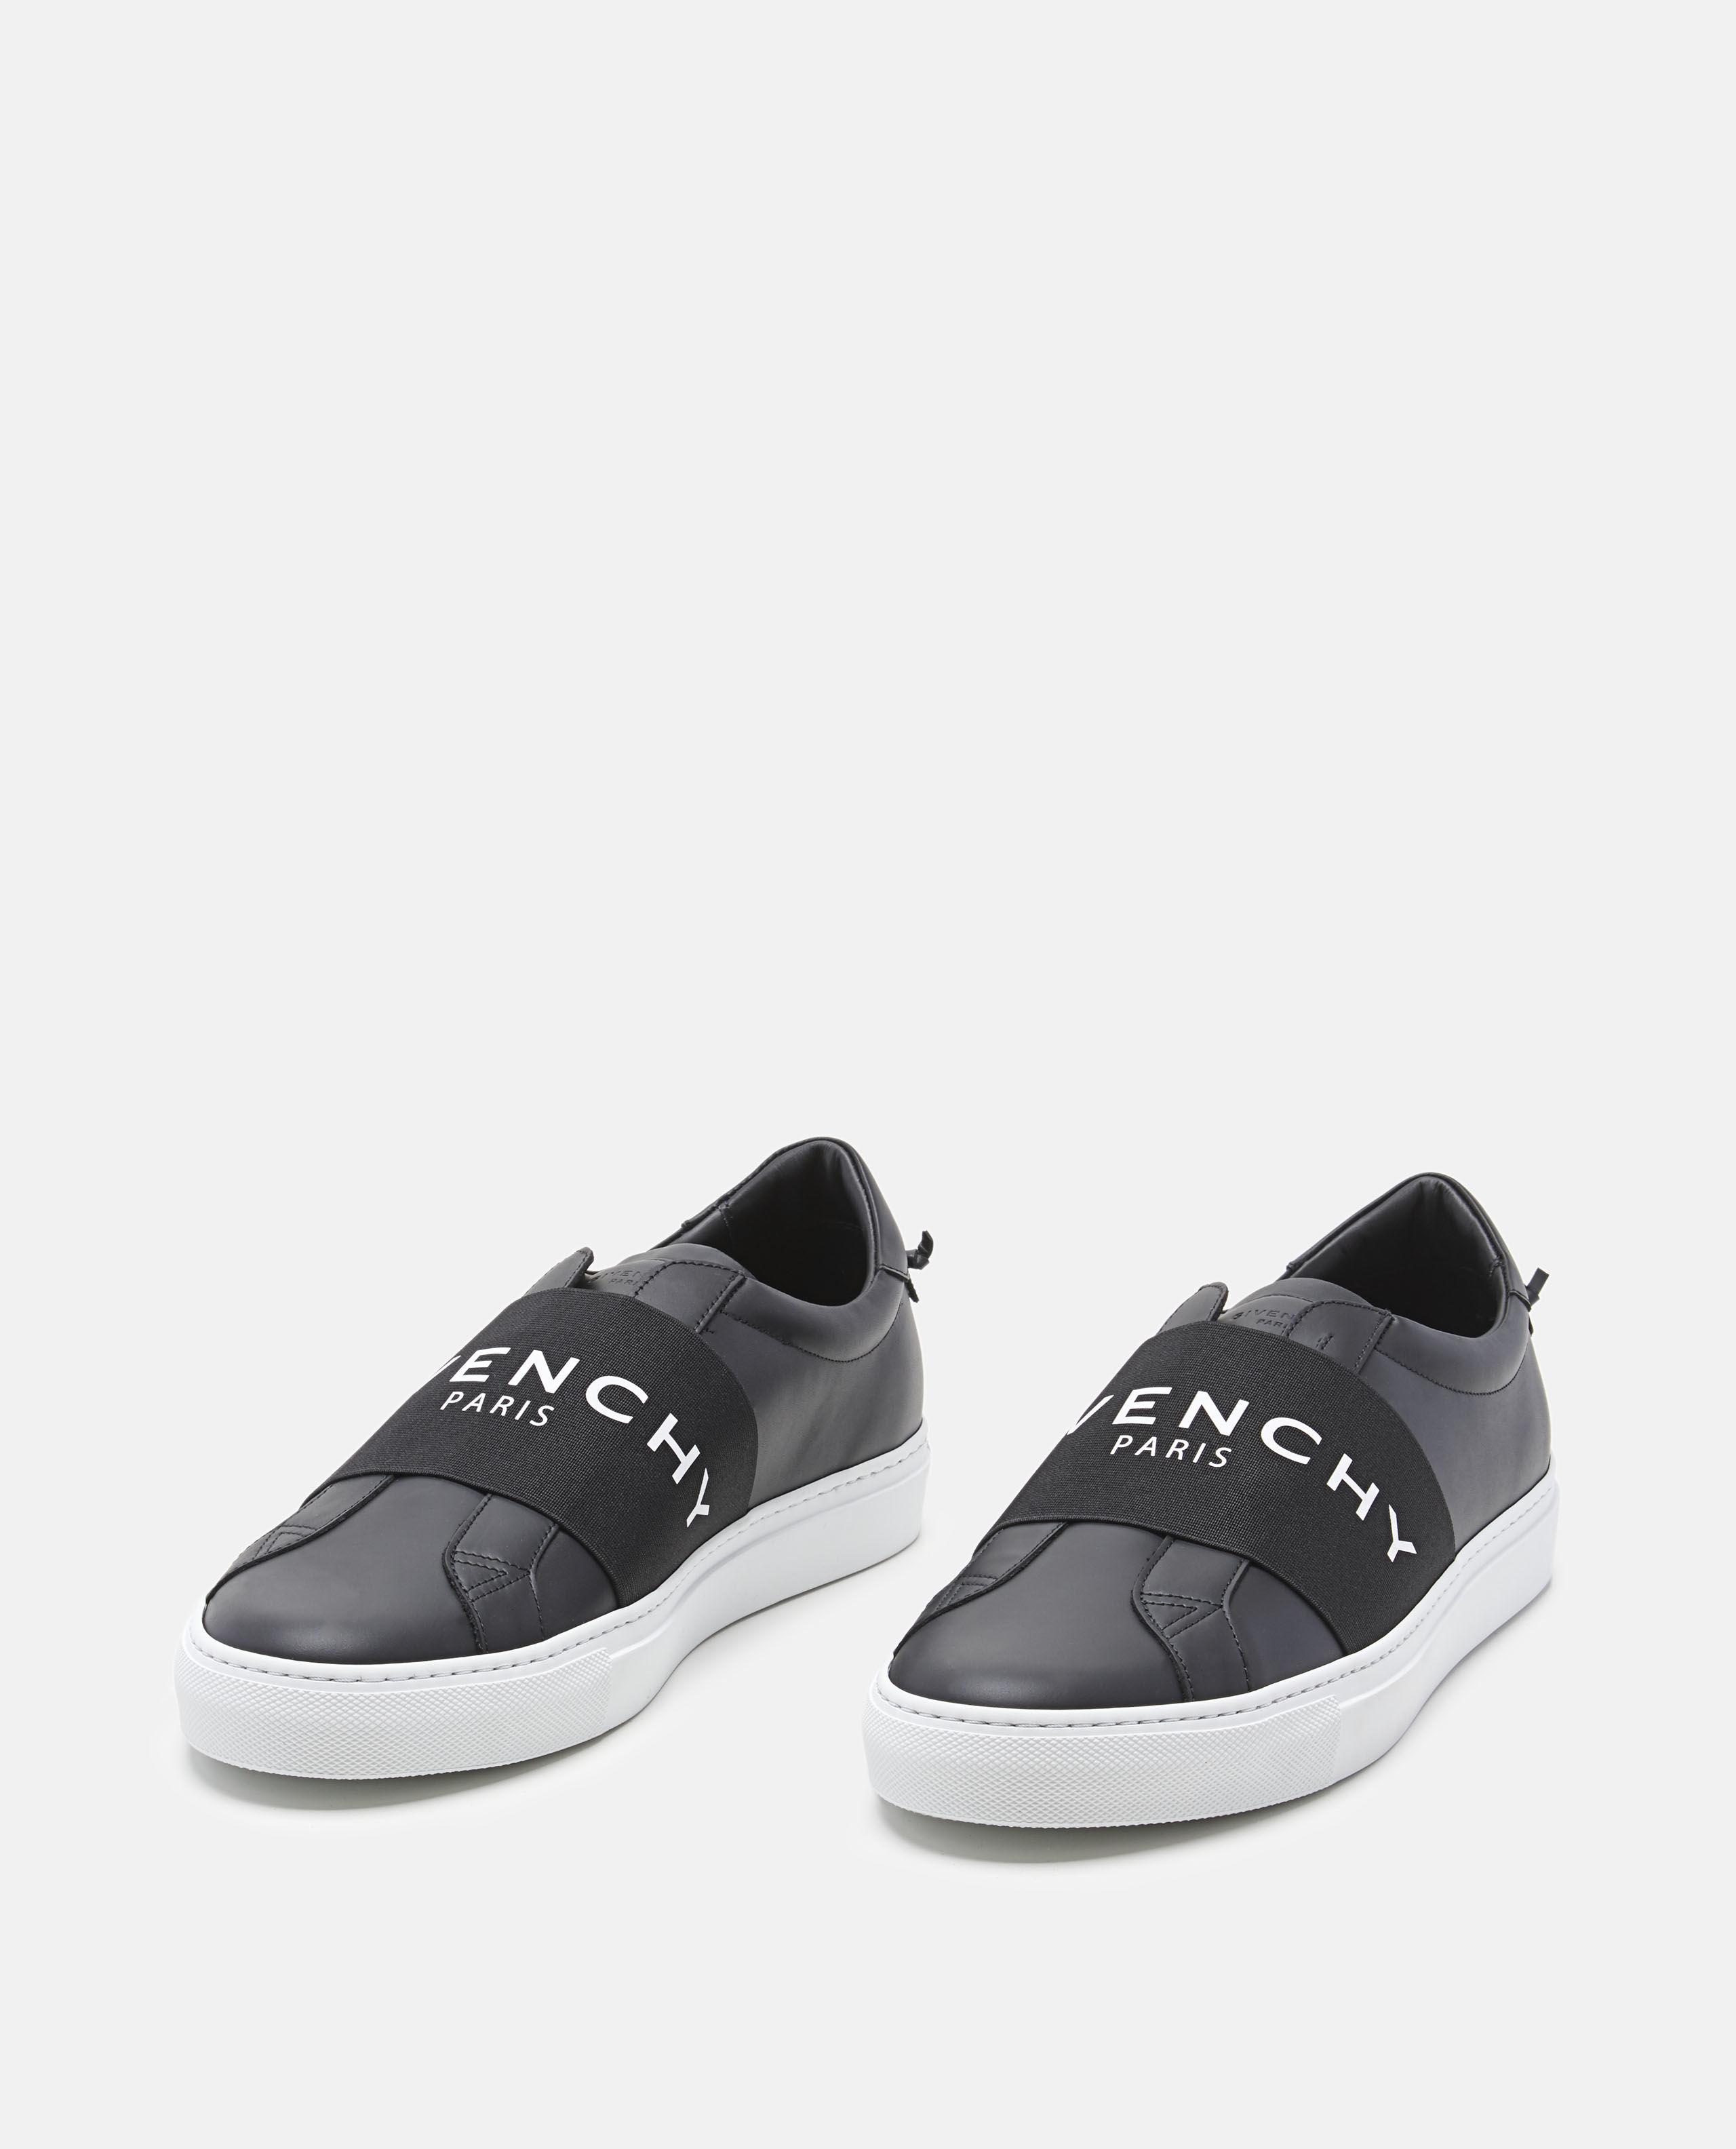 Givenchy Leather Paris Elastic Band Sneaker in Black for Men - Lyst